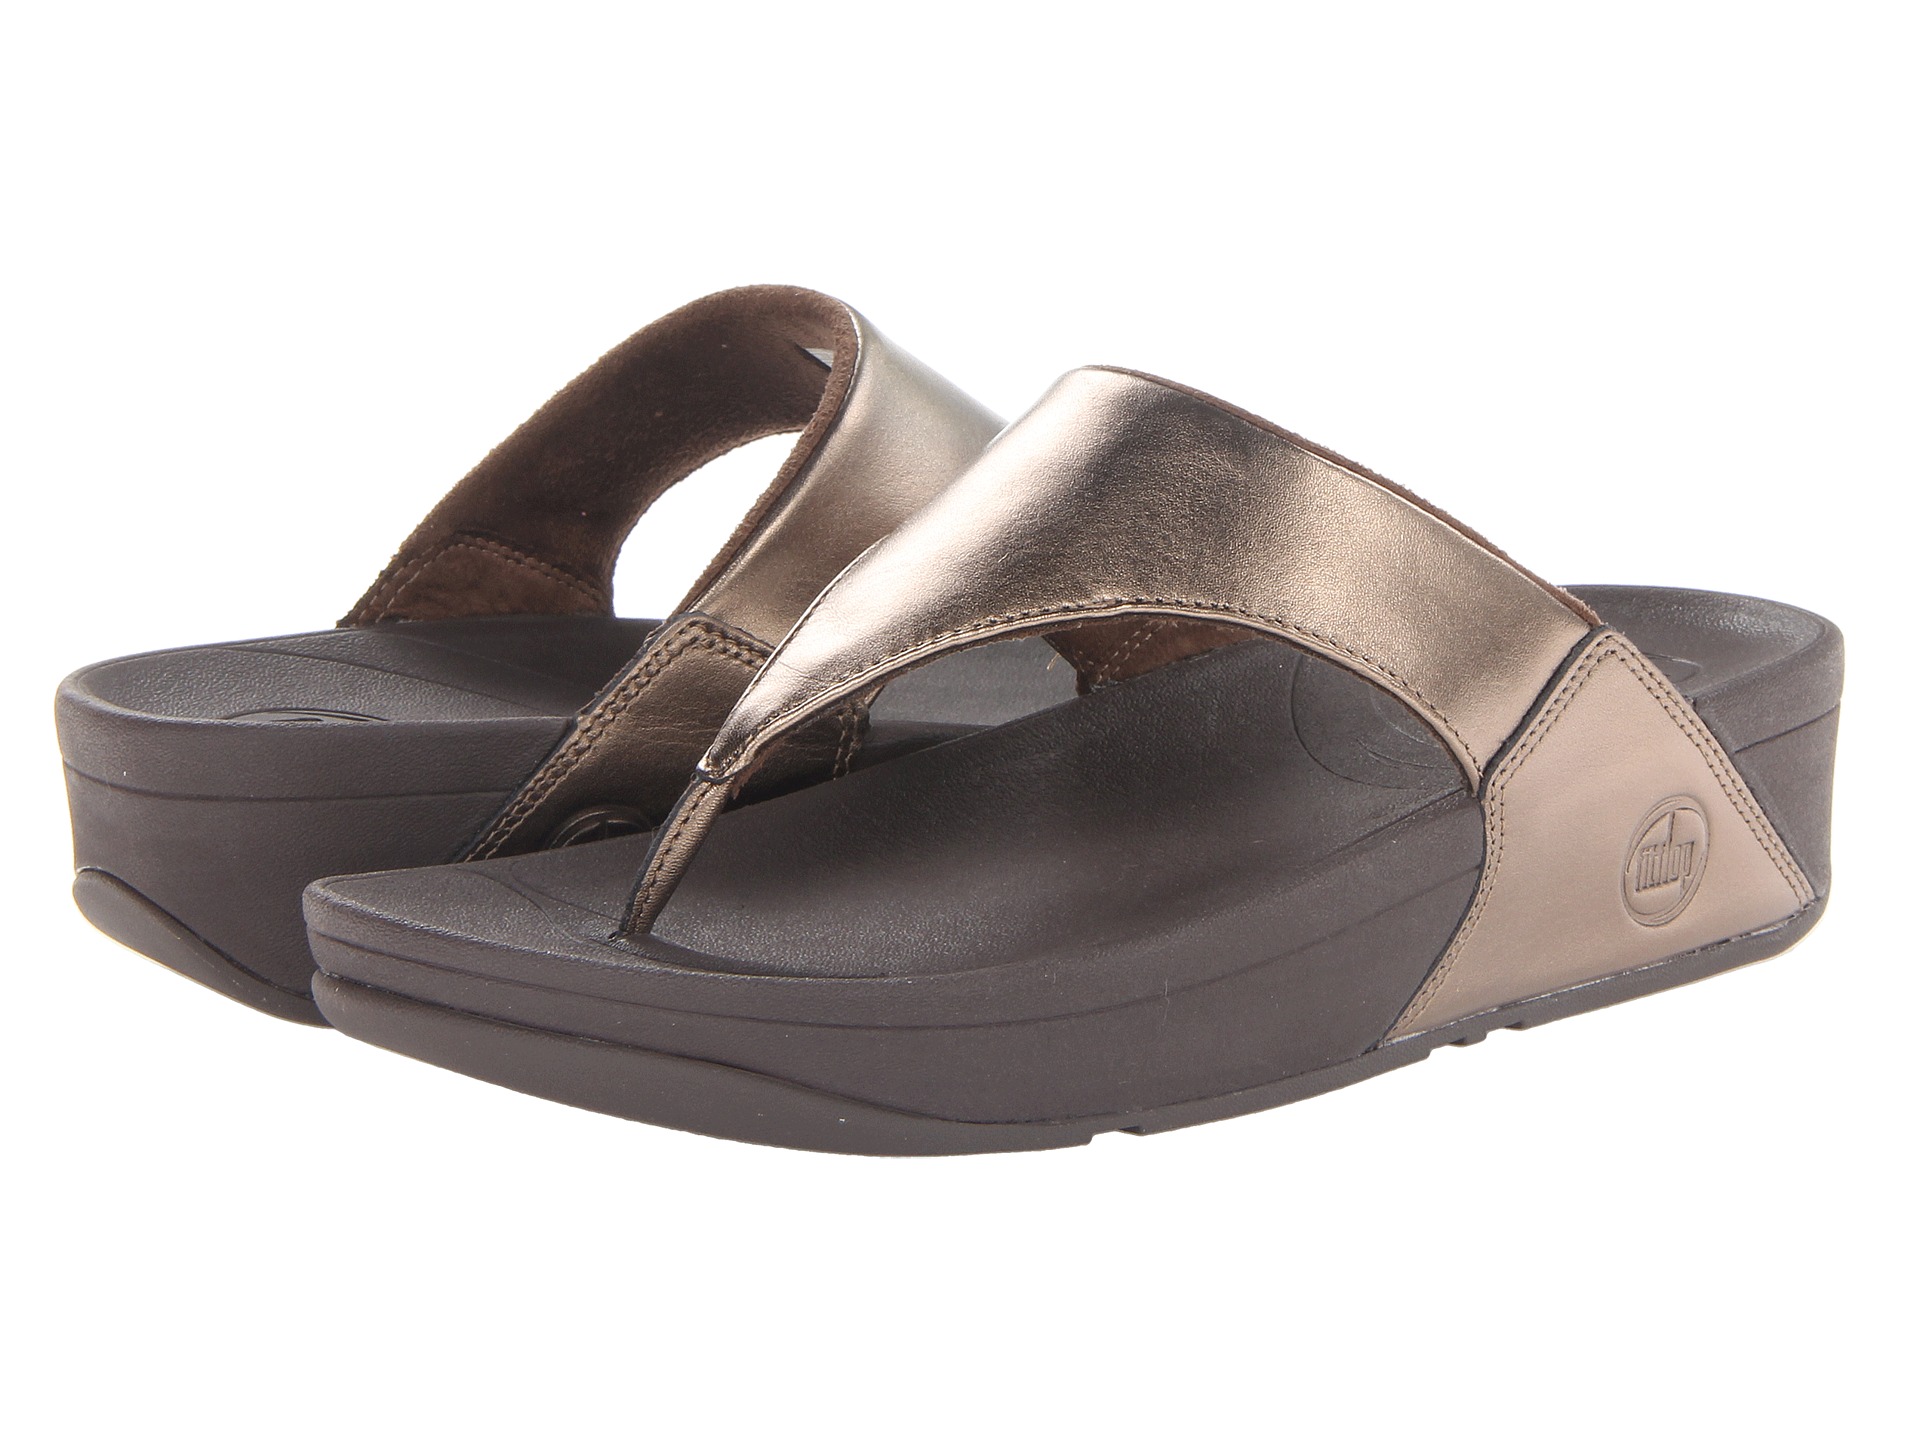 fitflop sale